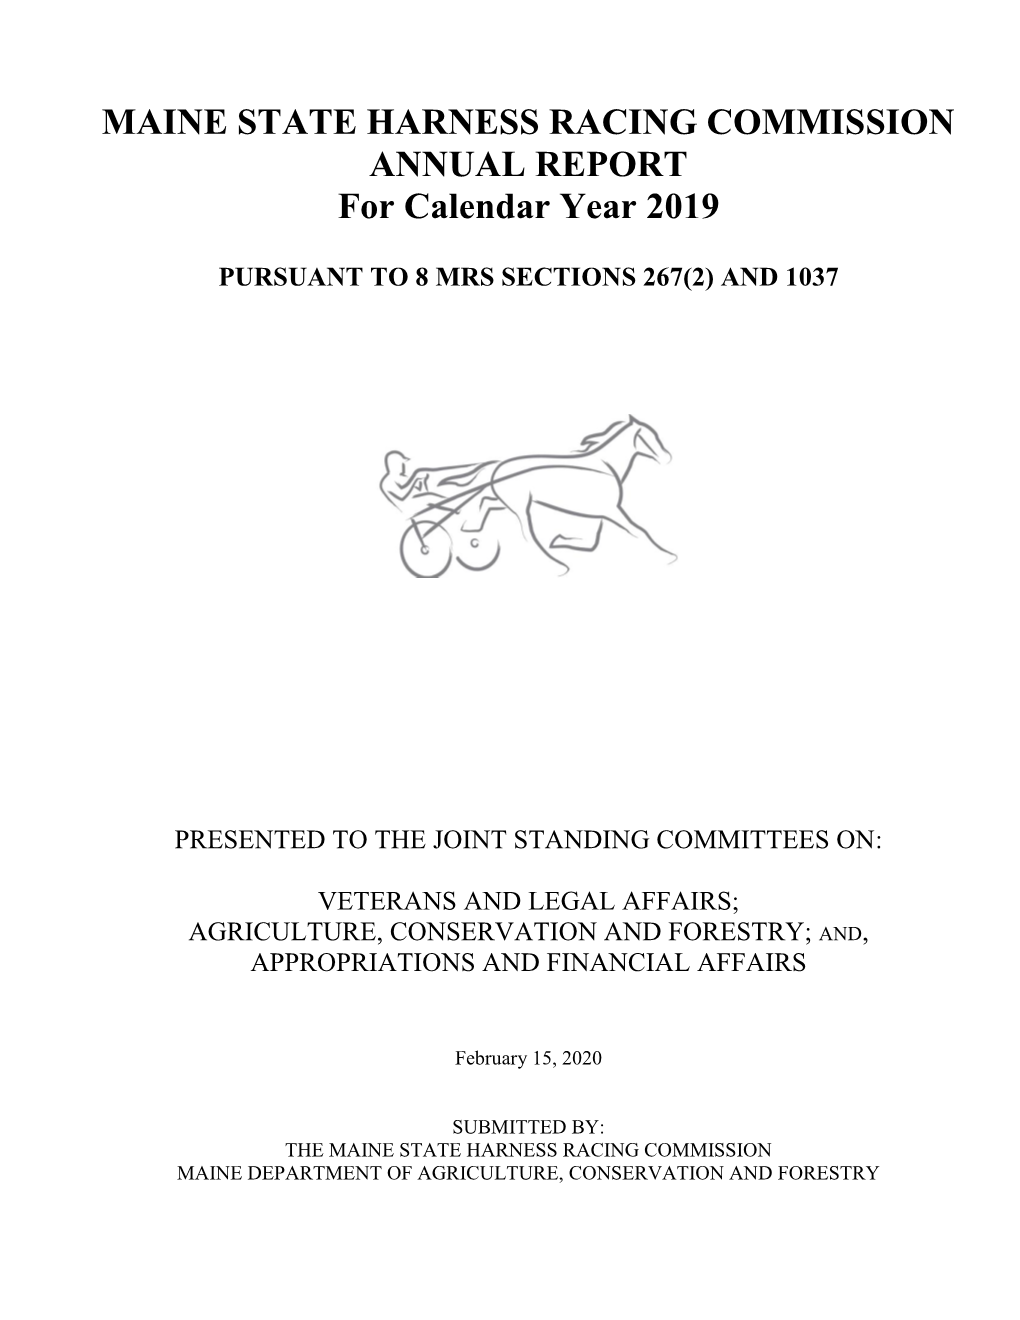 MAINE STATE HARNESS RACING COMMISSION ANNUAL REPORT for Calendar Year 2019